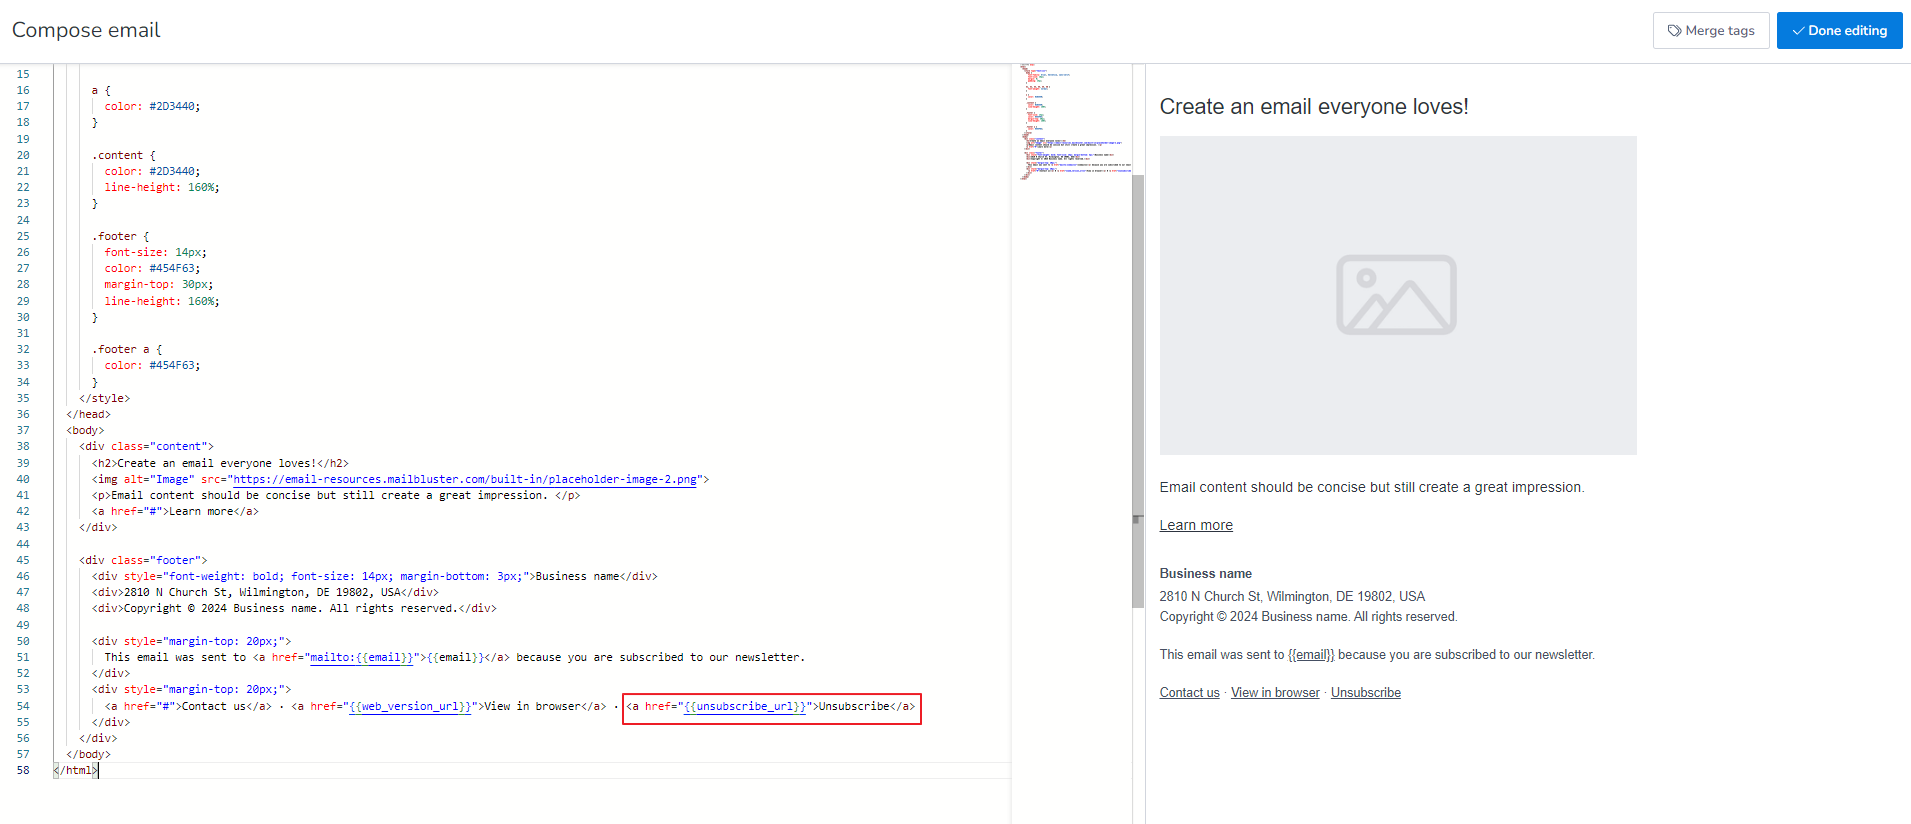 Setting the unsubscribe url merge tag in Compose email of HTML Editor